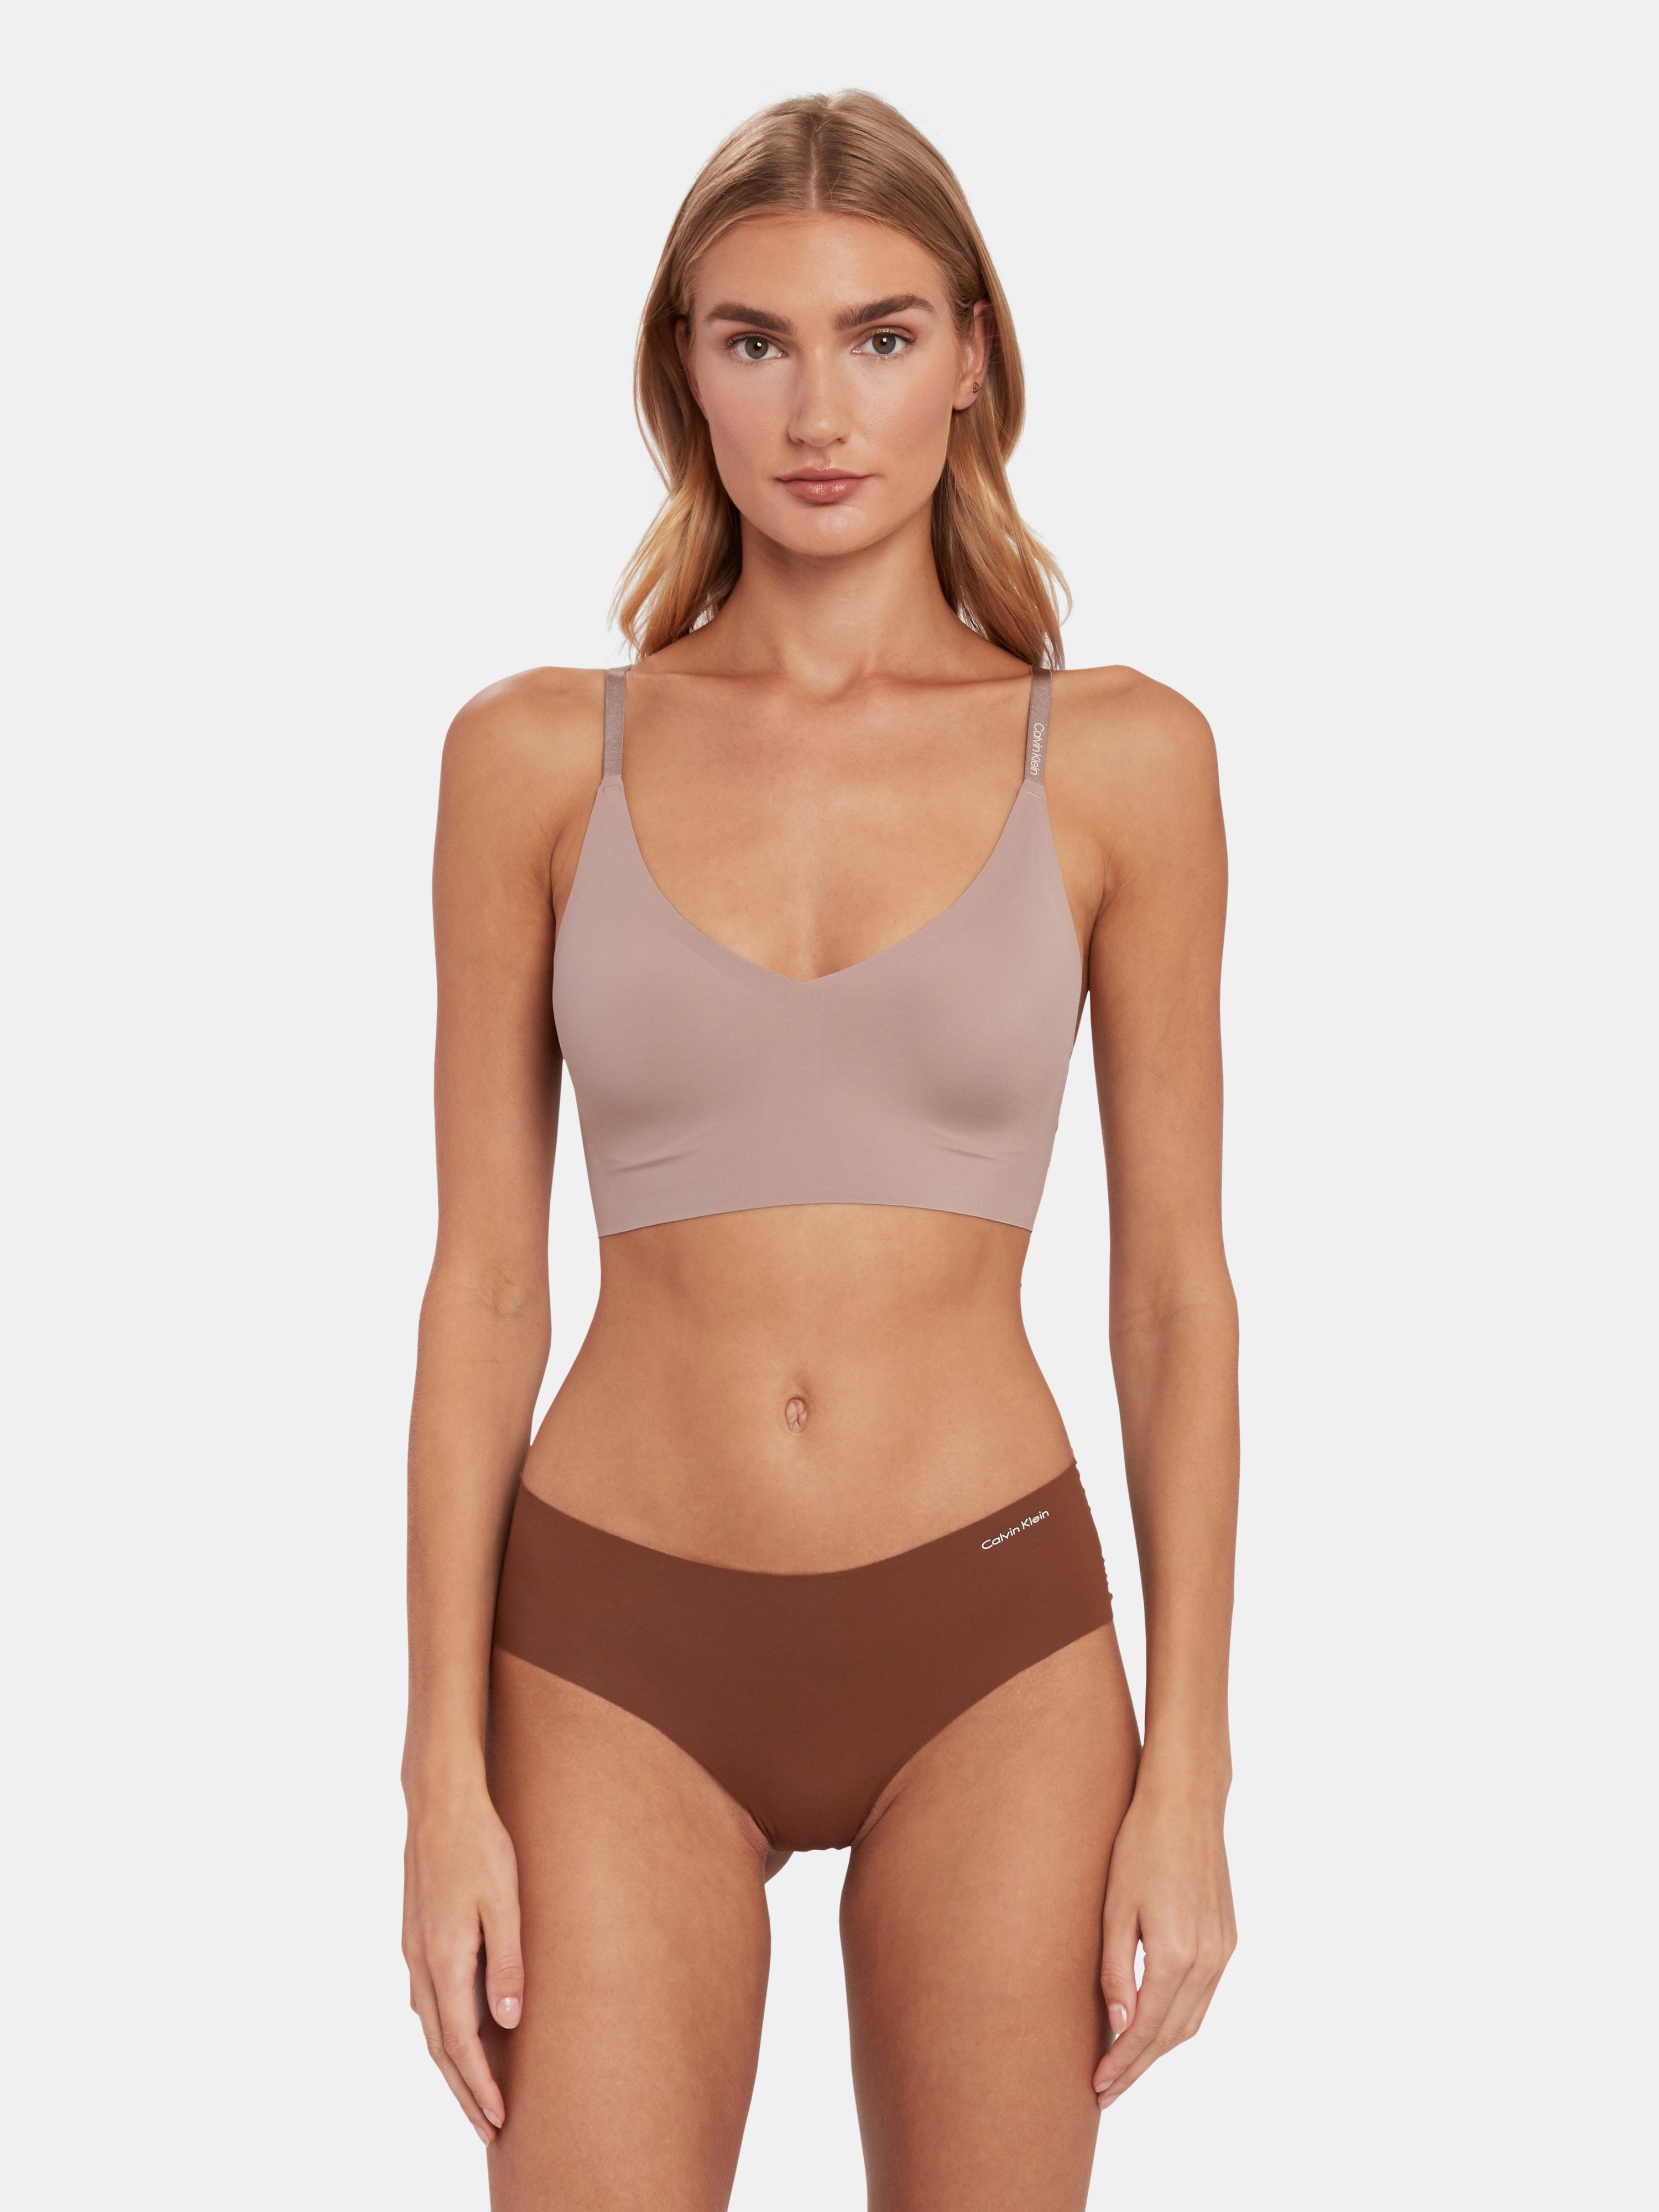 CALVIN KLEIN UNDERWEAR CALVIN KLEIN UNDERWEAR INVISIBLE LIGHTLY LINED TRIANGLE BRALETTE